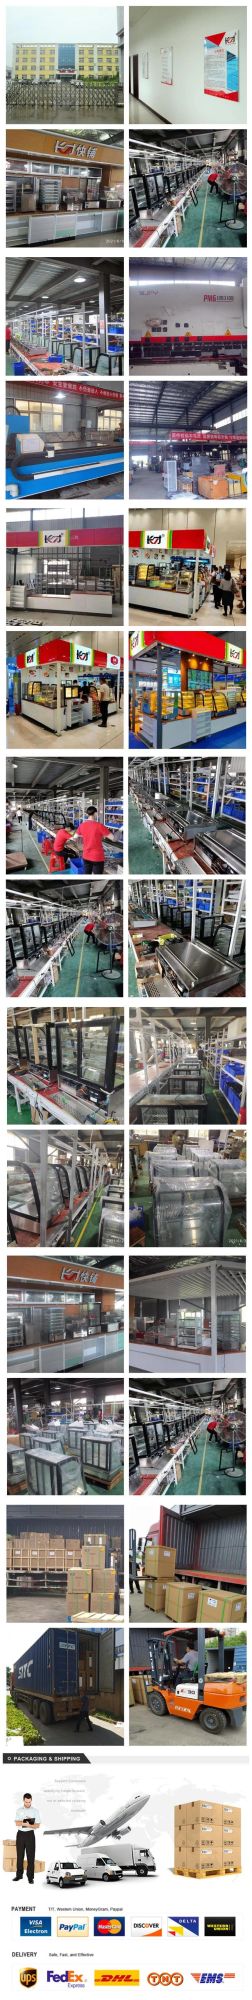 Scm-10 Food Steam Corn Steamer House Hold Convenient Store Use